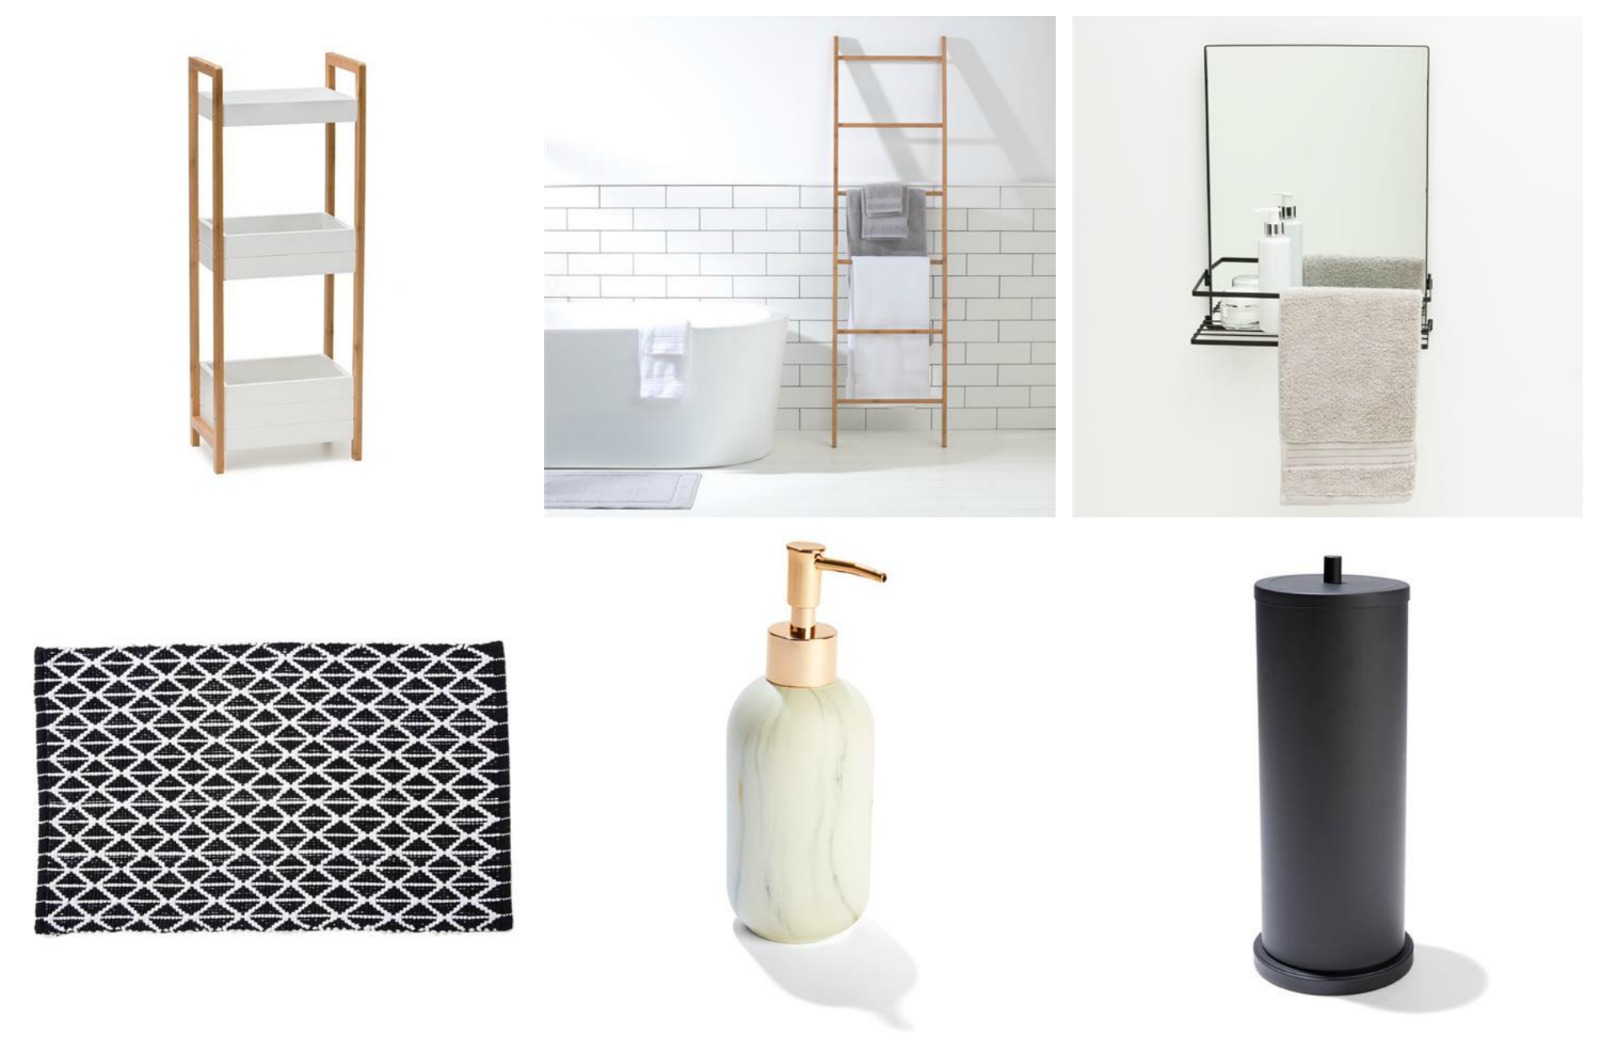 kmart toilet roll holder black Cheap and chic bathroom accessories and storage from kmart